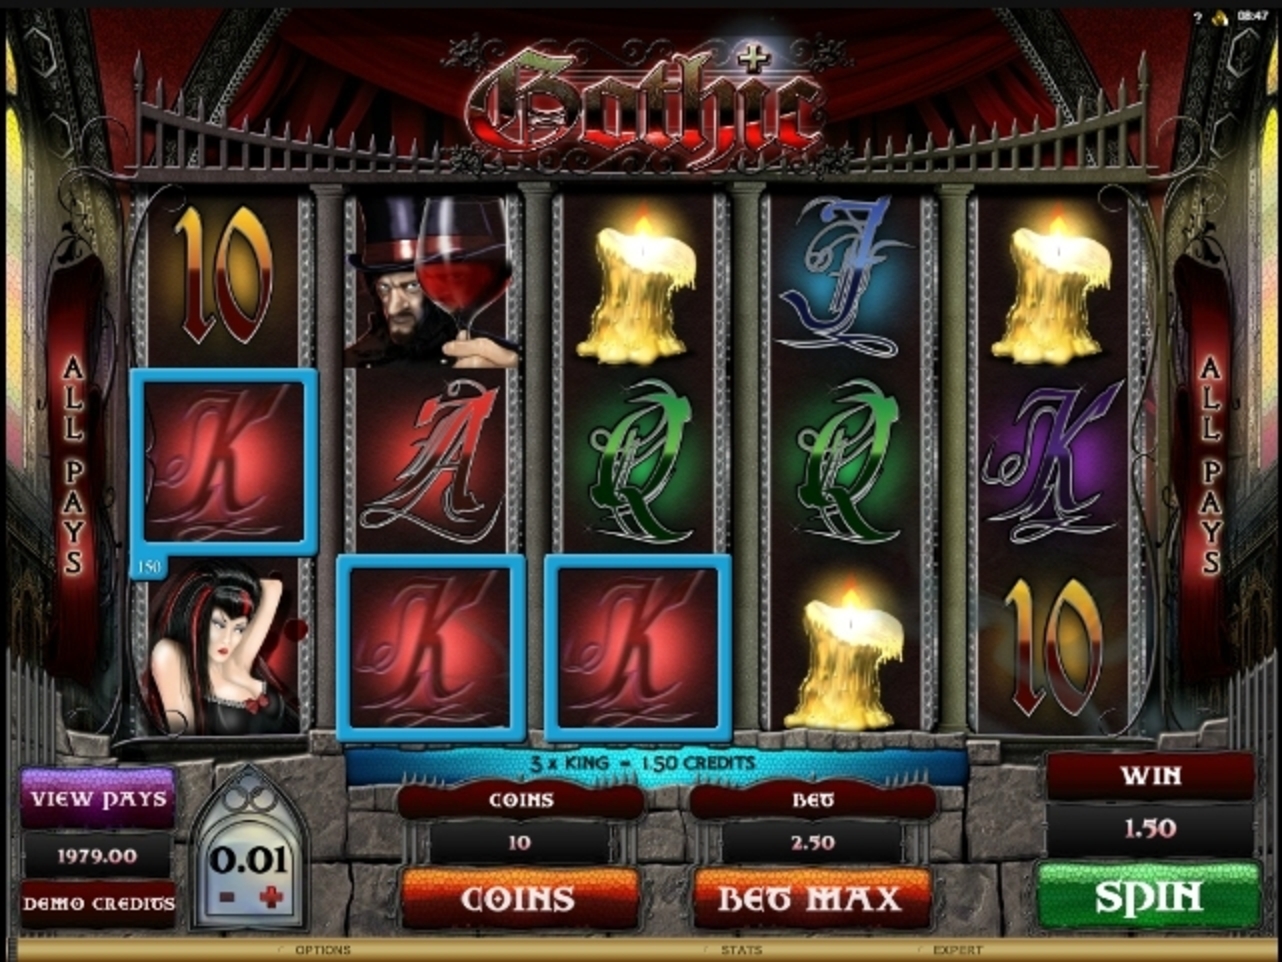 Win Money in Gothic Free Slot Game by Microgaming